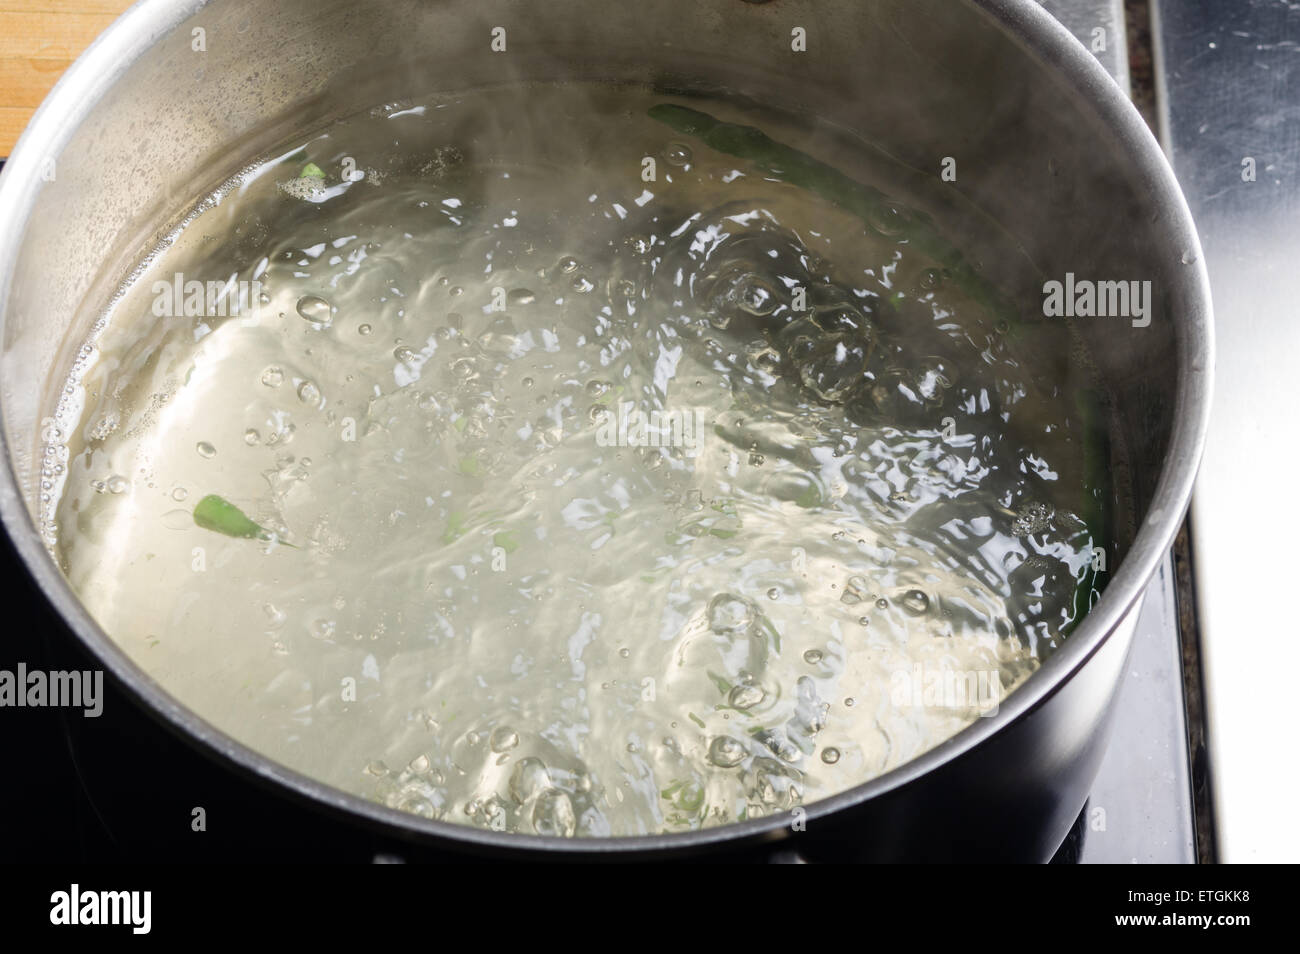 Hot boiling water in cook pot on stove Stock Photo